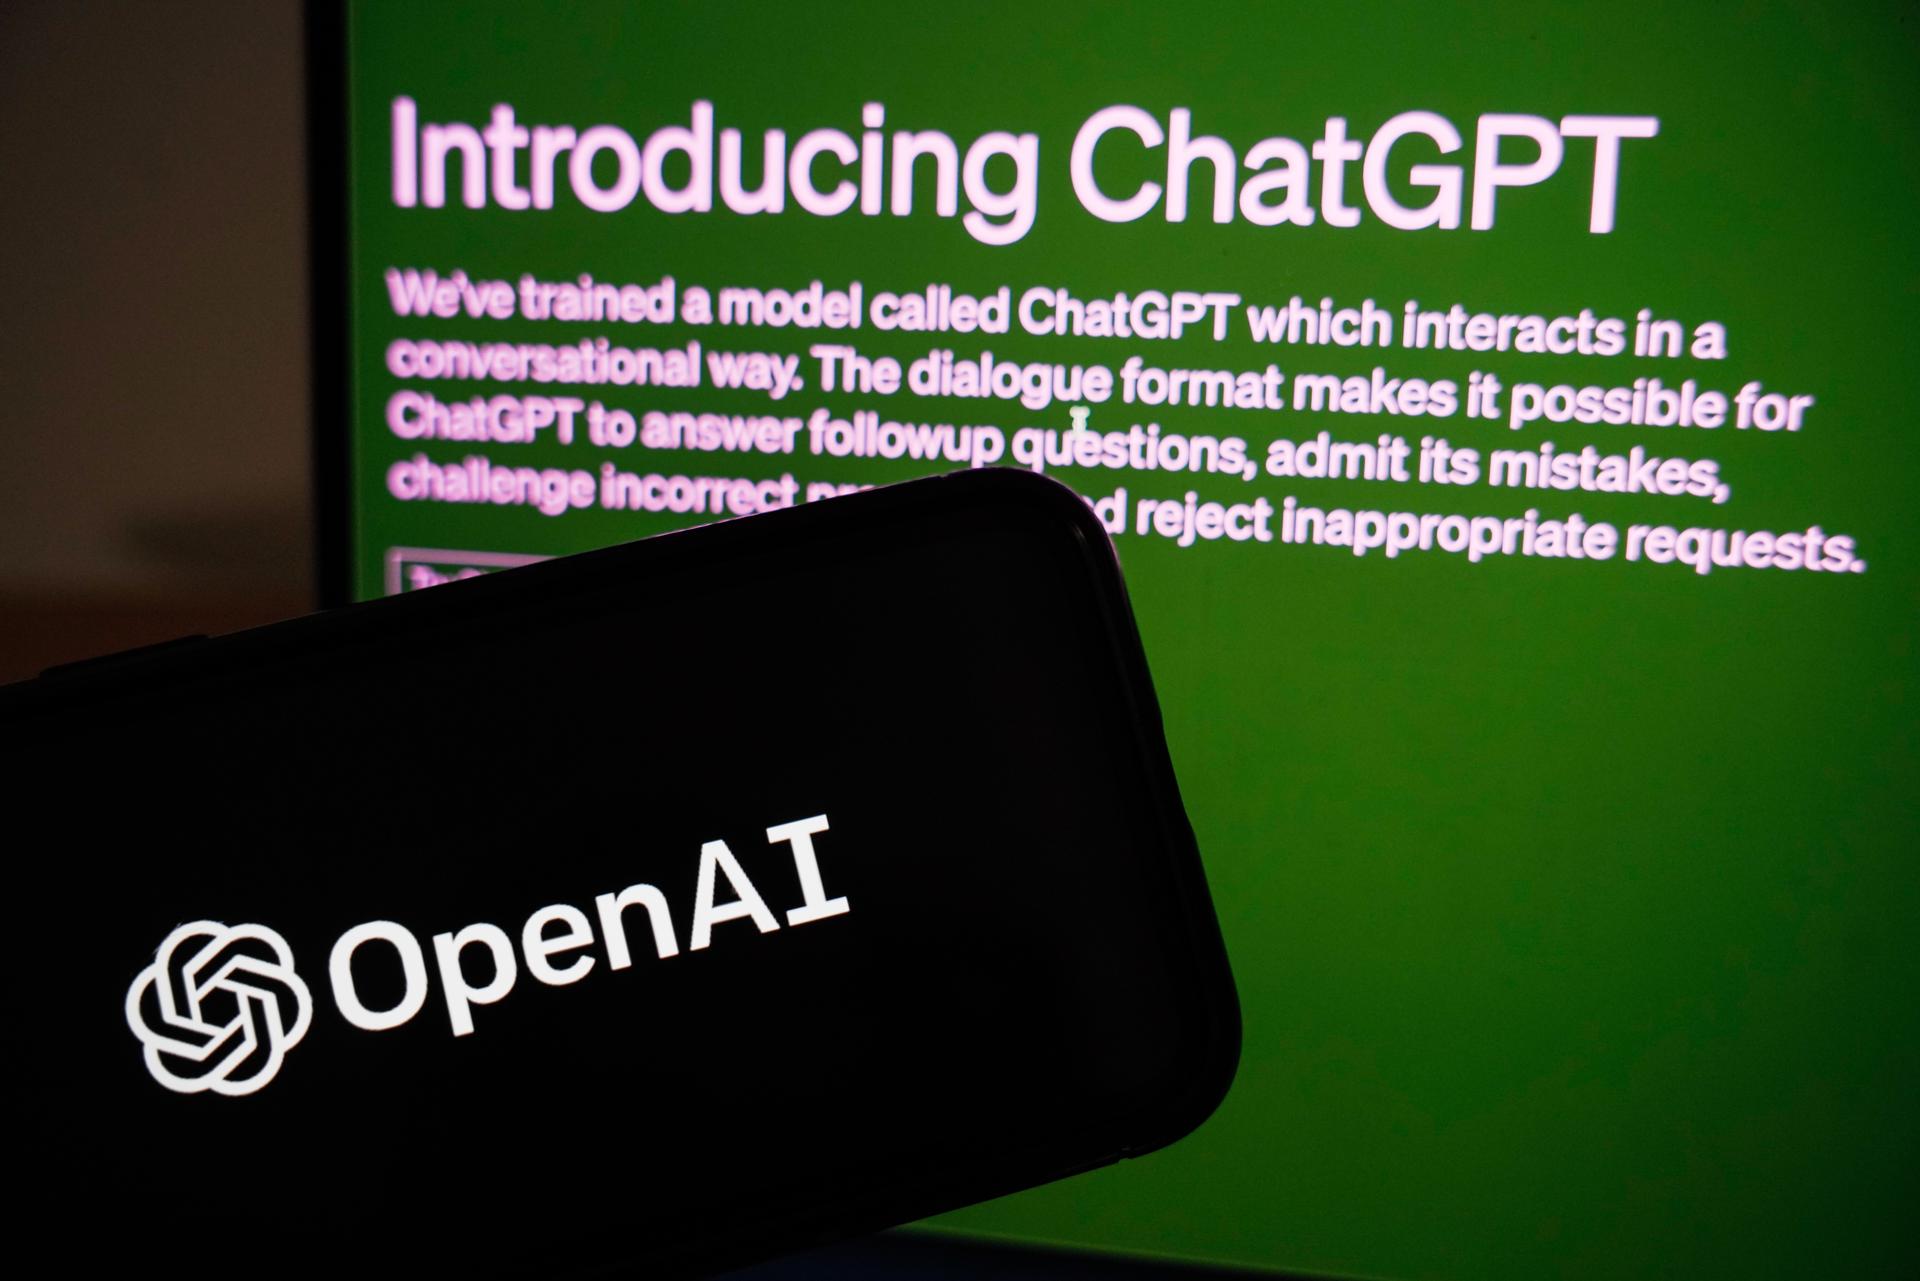 USA: Open investigation into OpenAI and its ChatGPT tool